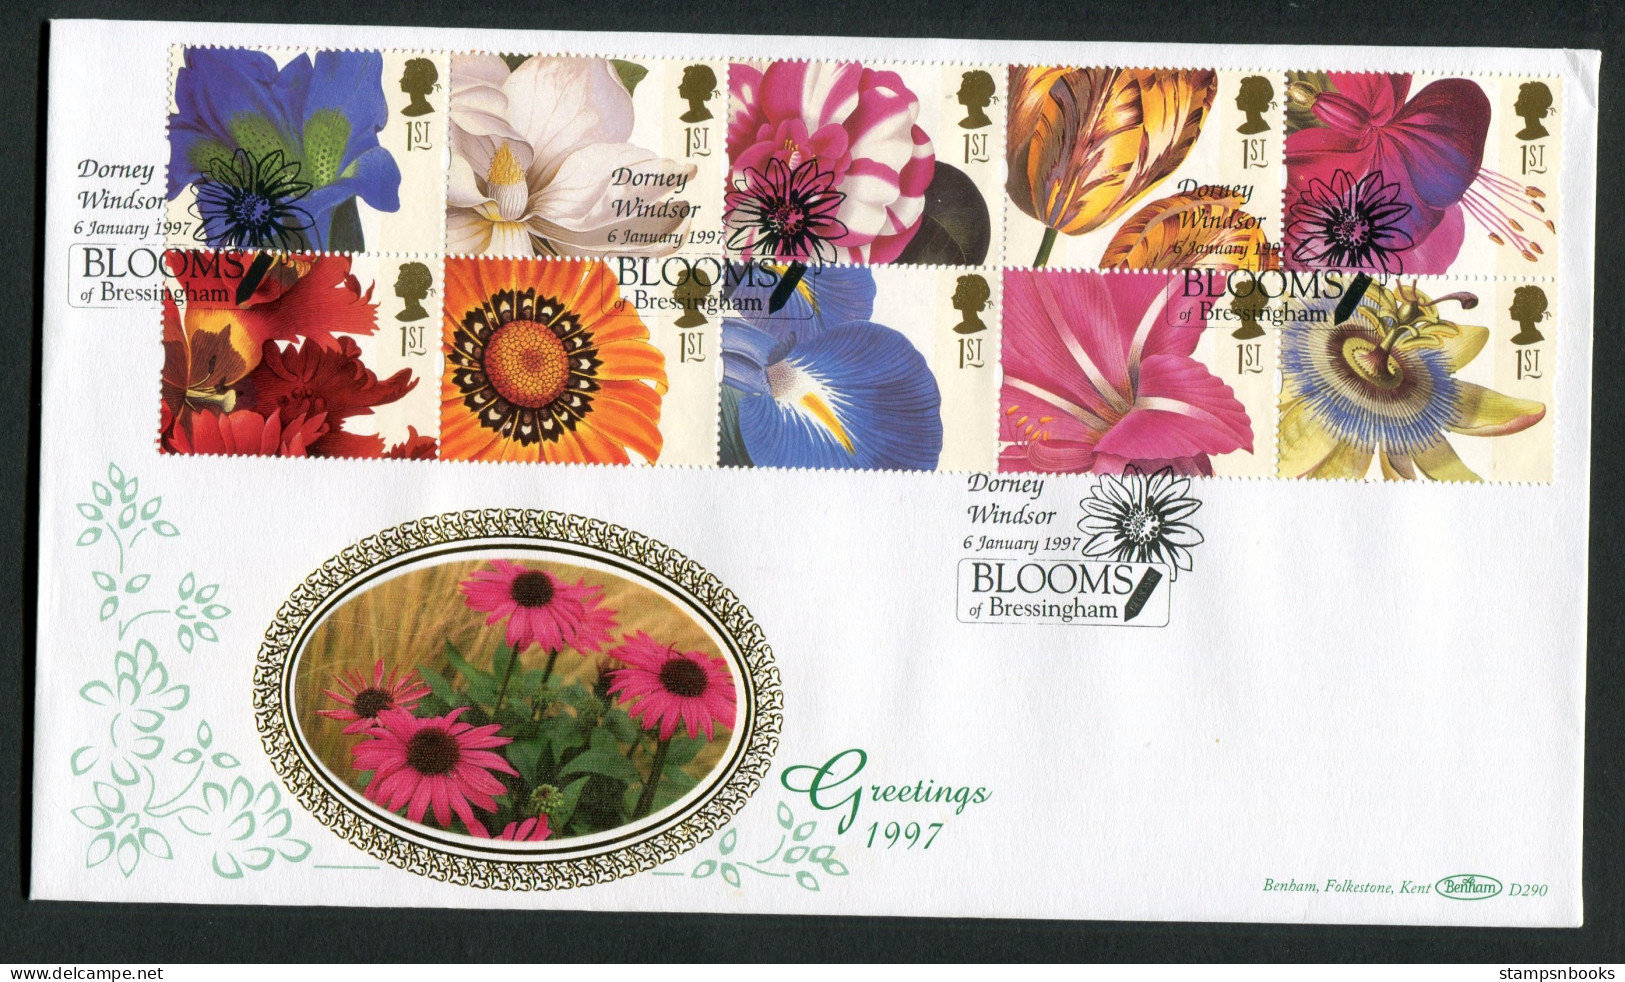 1997 GB Flowers Greeting Stamps First Day Cover, Dorney Windsor Blooms Of Bressingham Benham D290 FDC - 1991-2000 Em. Décimales